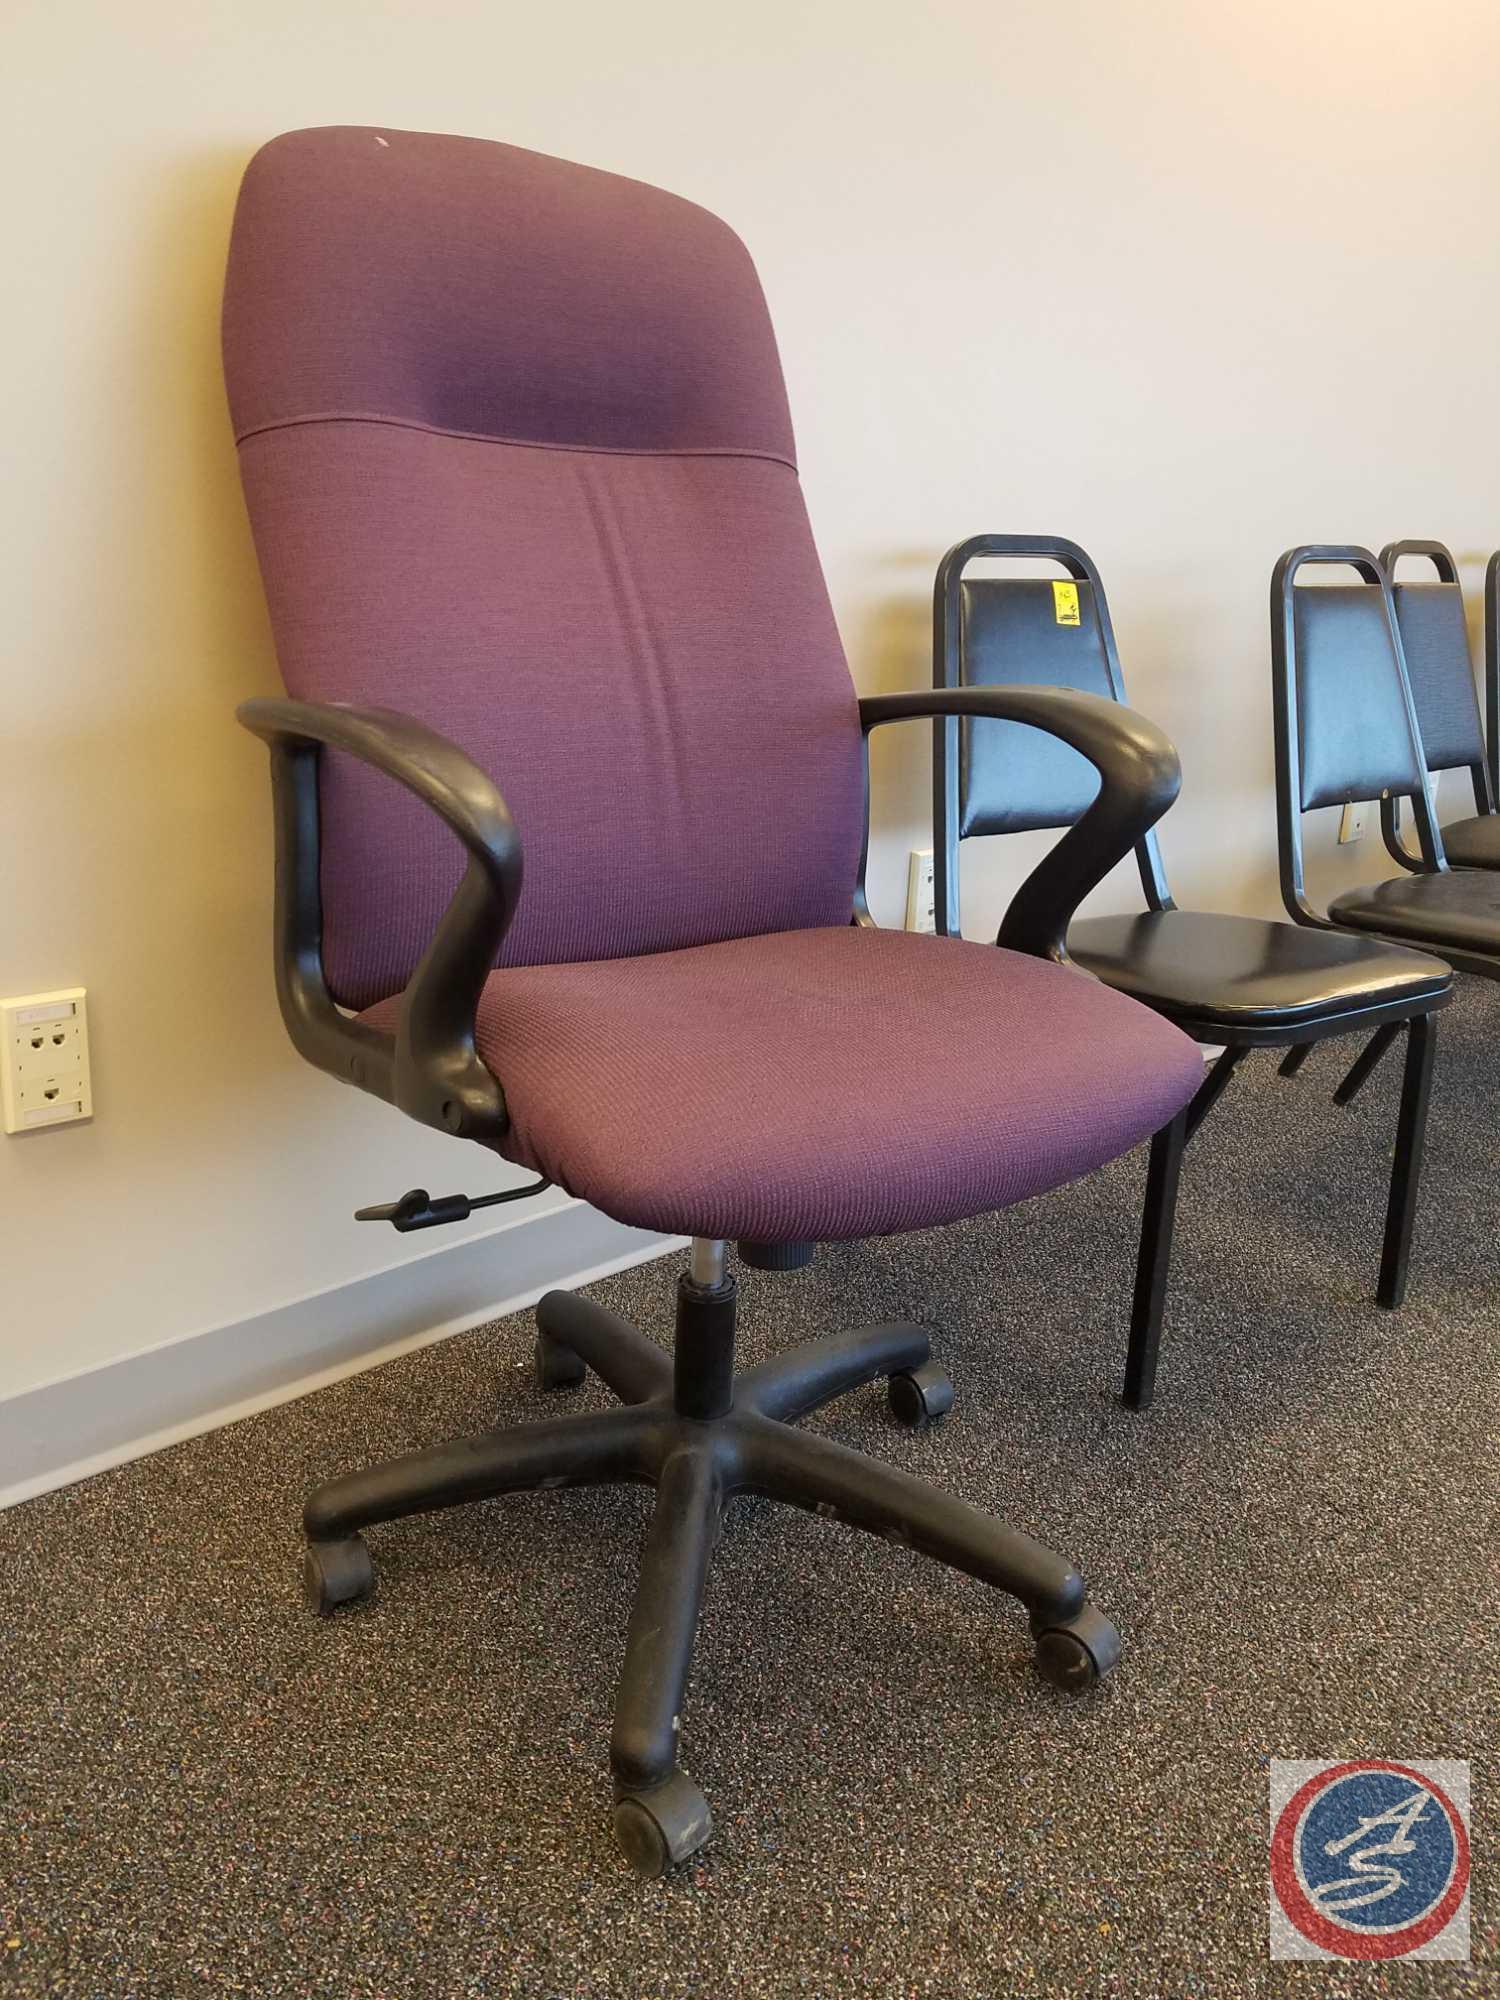 (6) Virco Chairs Measuring and HON Adjustable Rolling Office Chair [DAMAGE TO ONE OF THE VIRCO